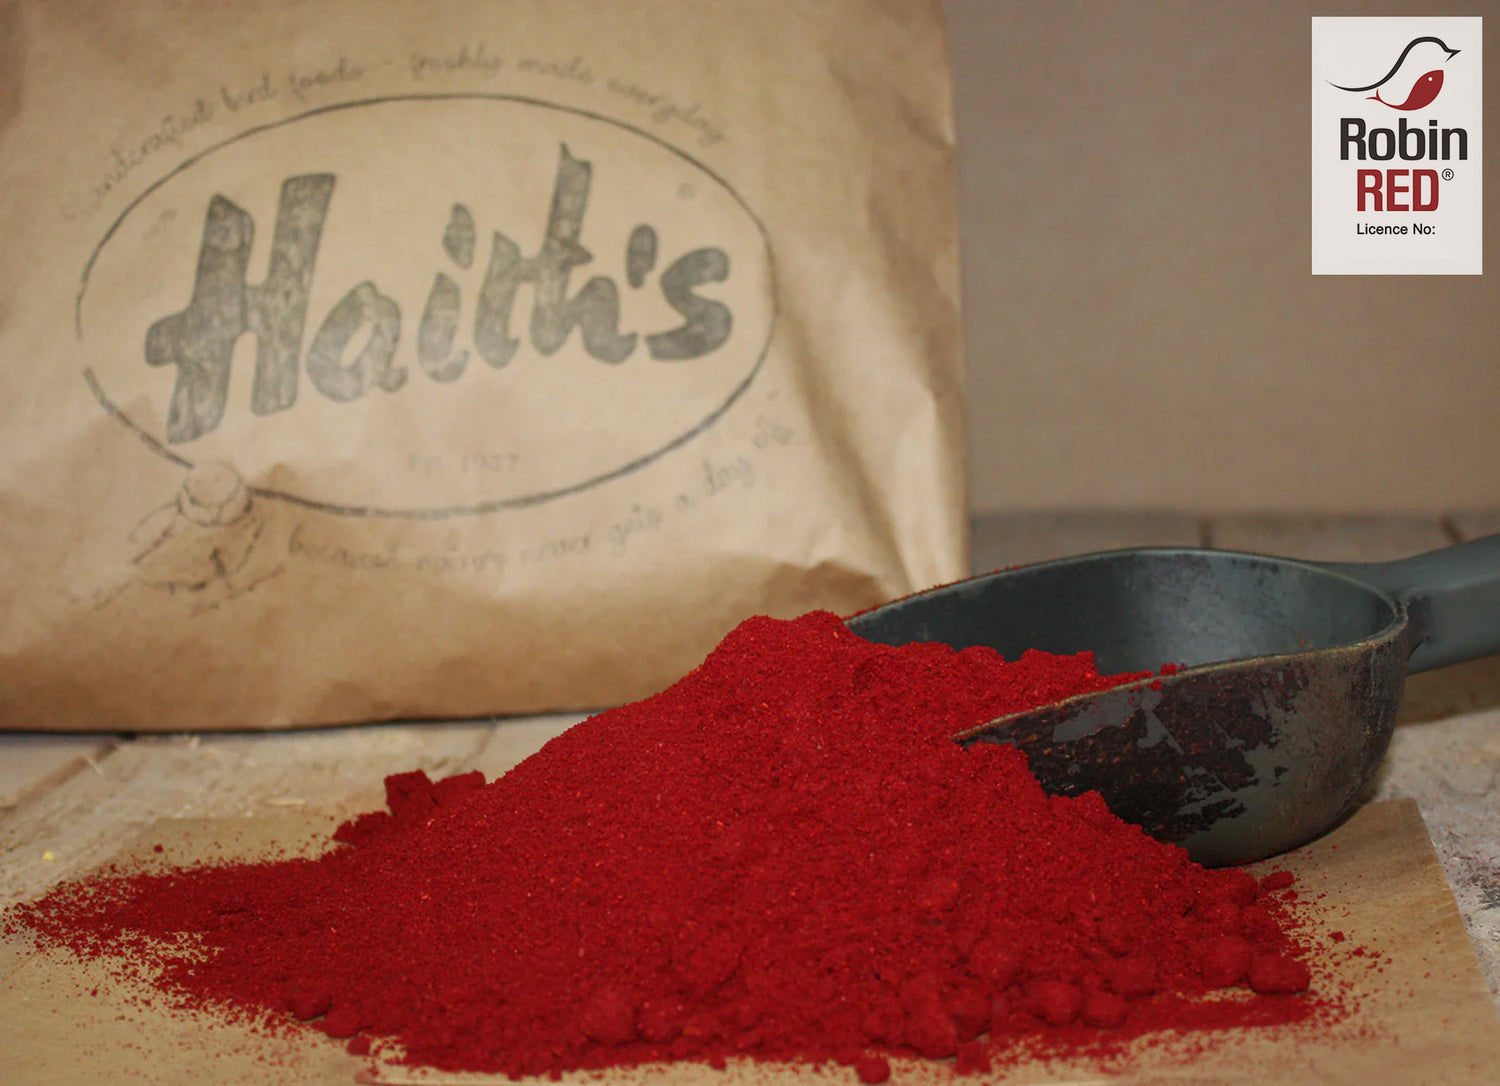 Haith's robin red for fishing inside a scoop 